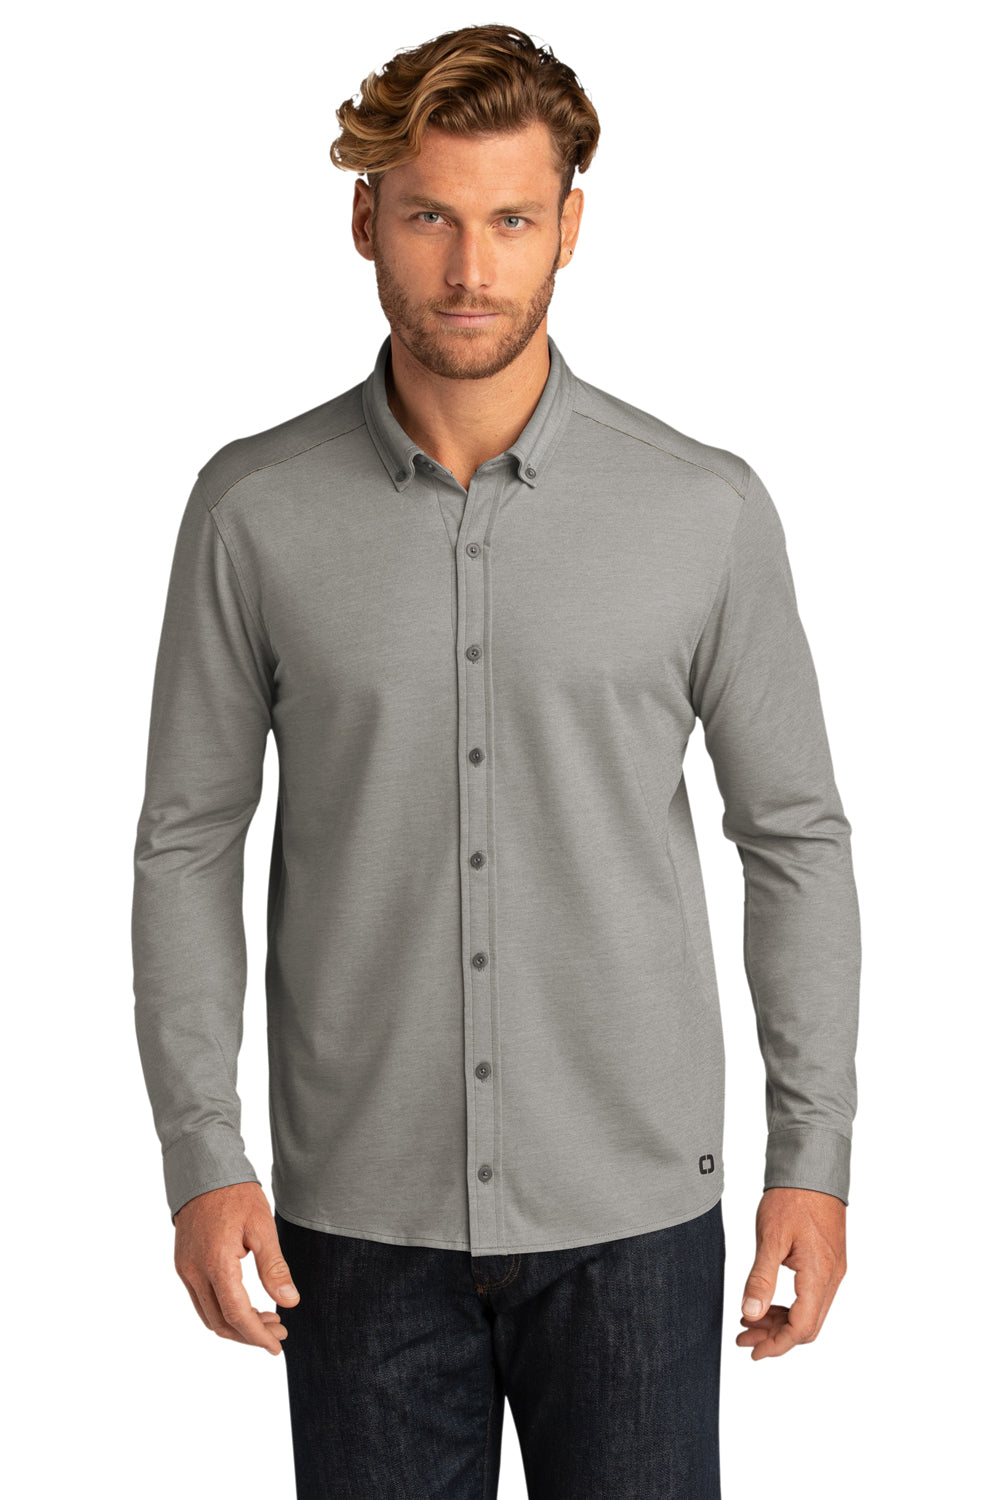 Ogio Mens Code Stretch Long Sleeve Button Down Shirt Heather Tarmac Grey Front